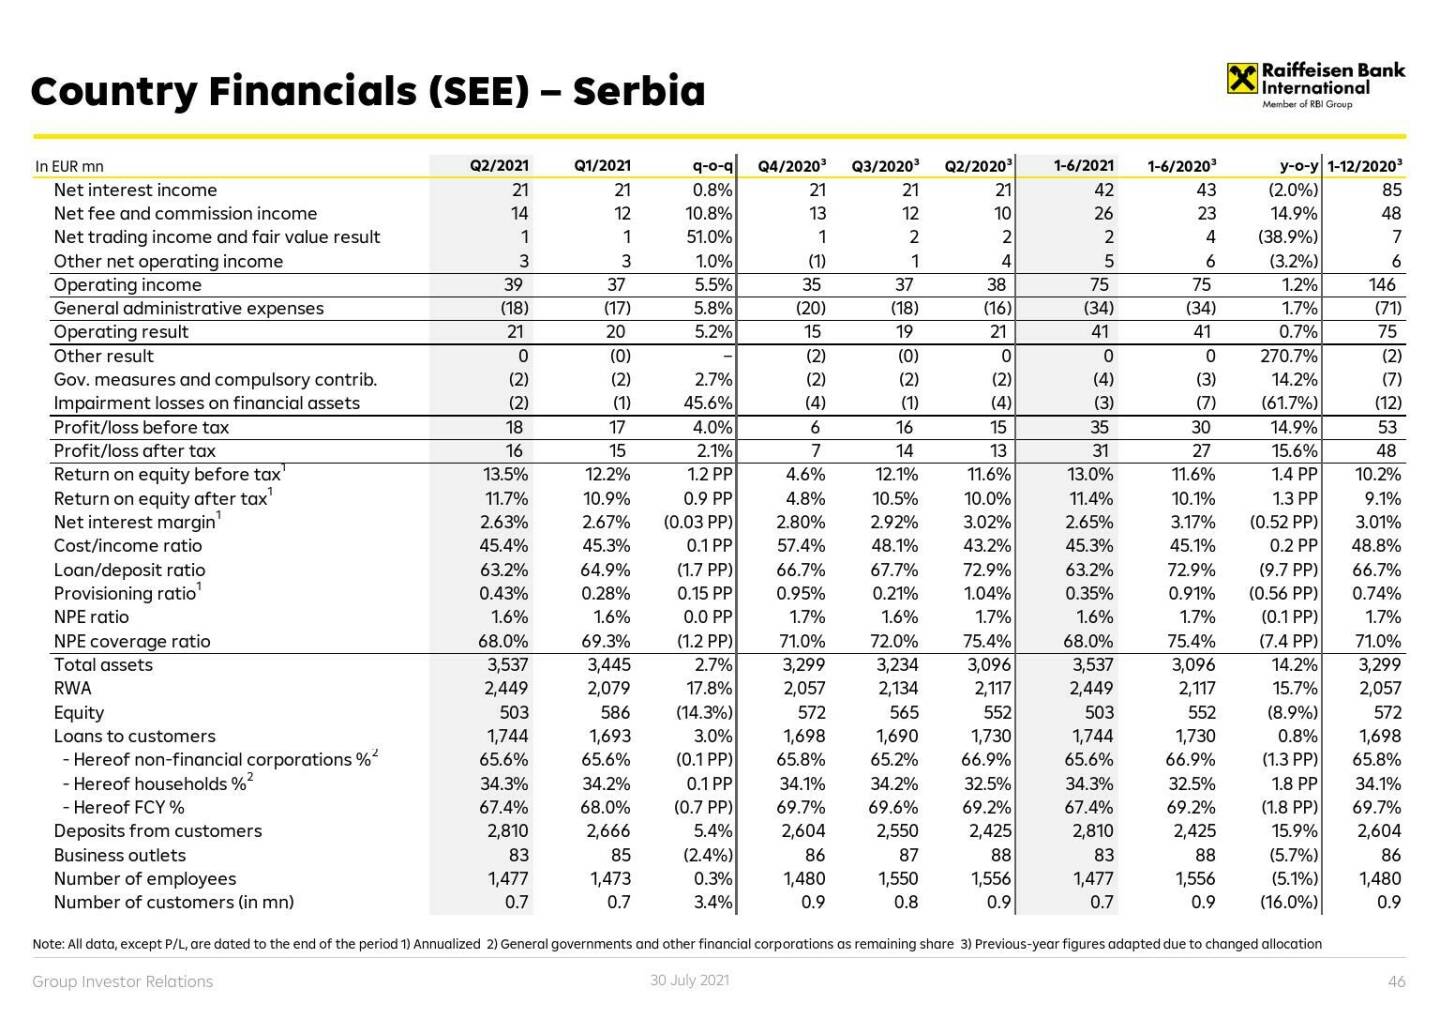 RBI - Country financials (CE) - Serbia